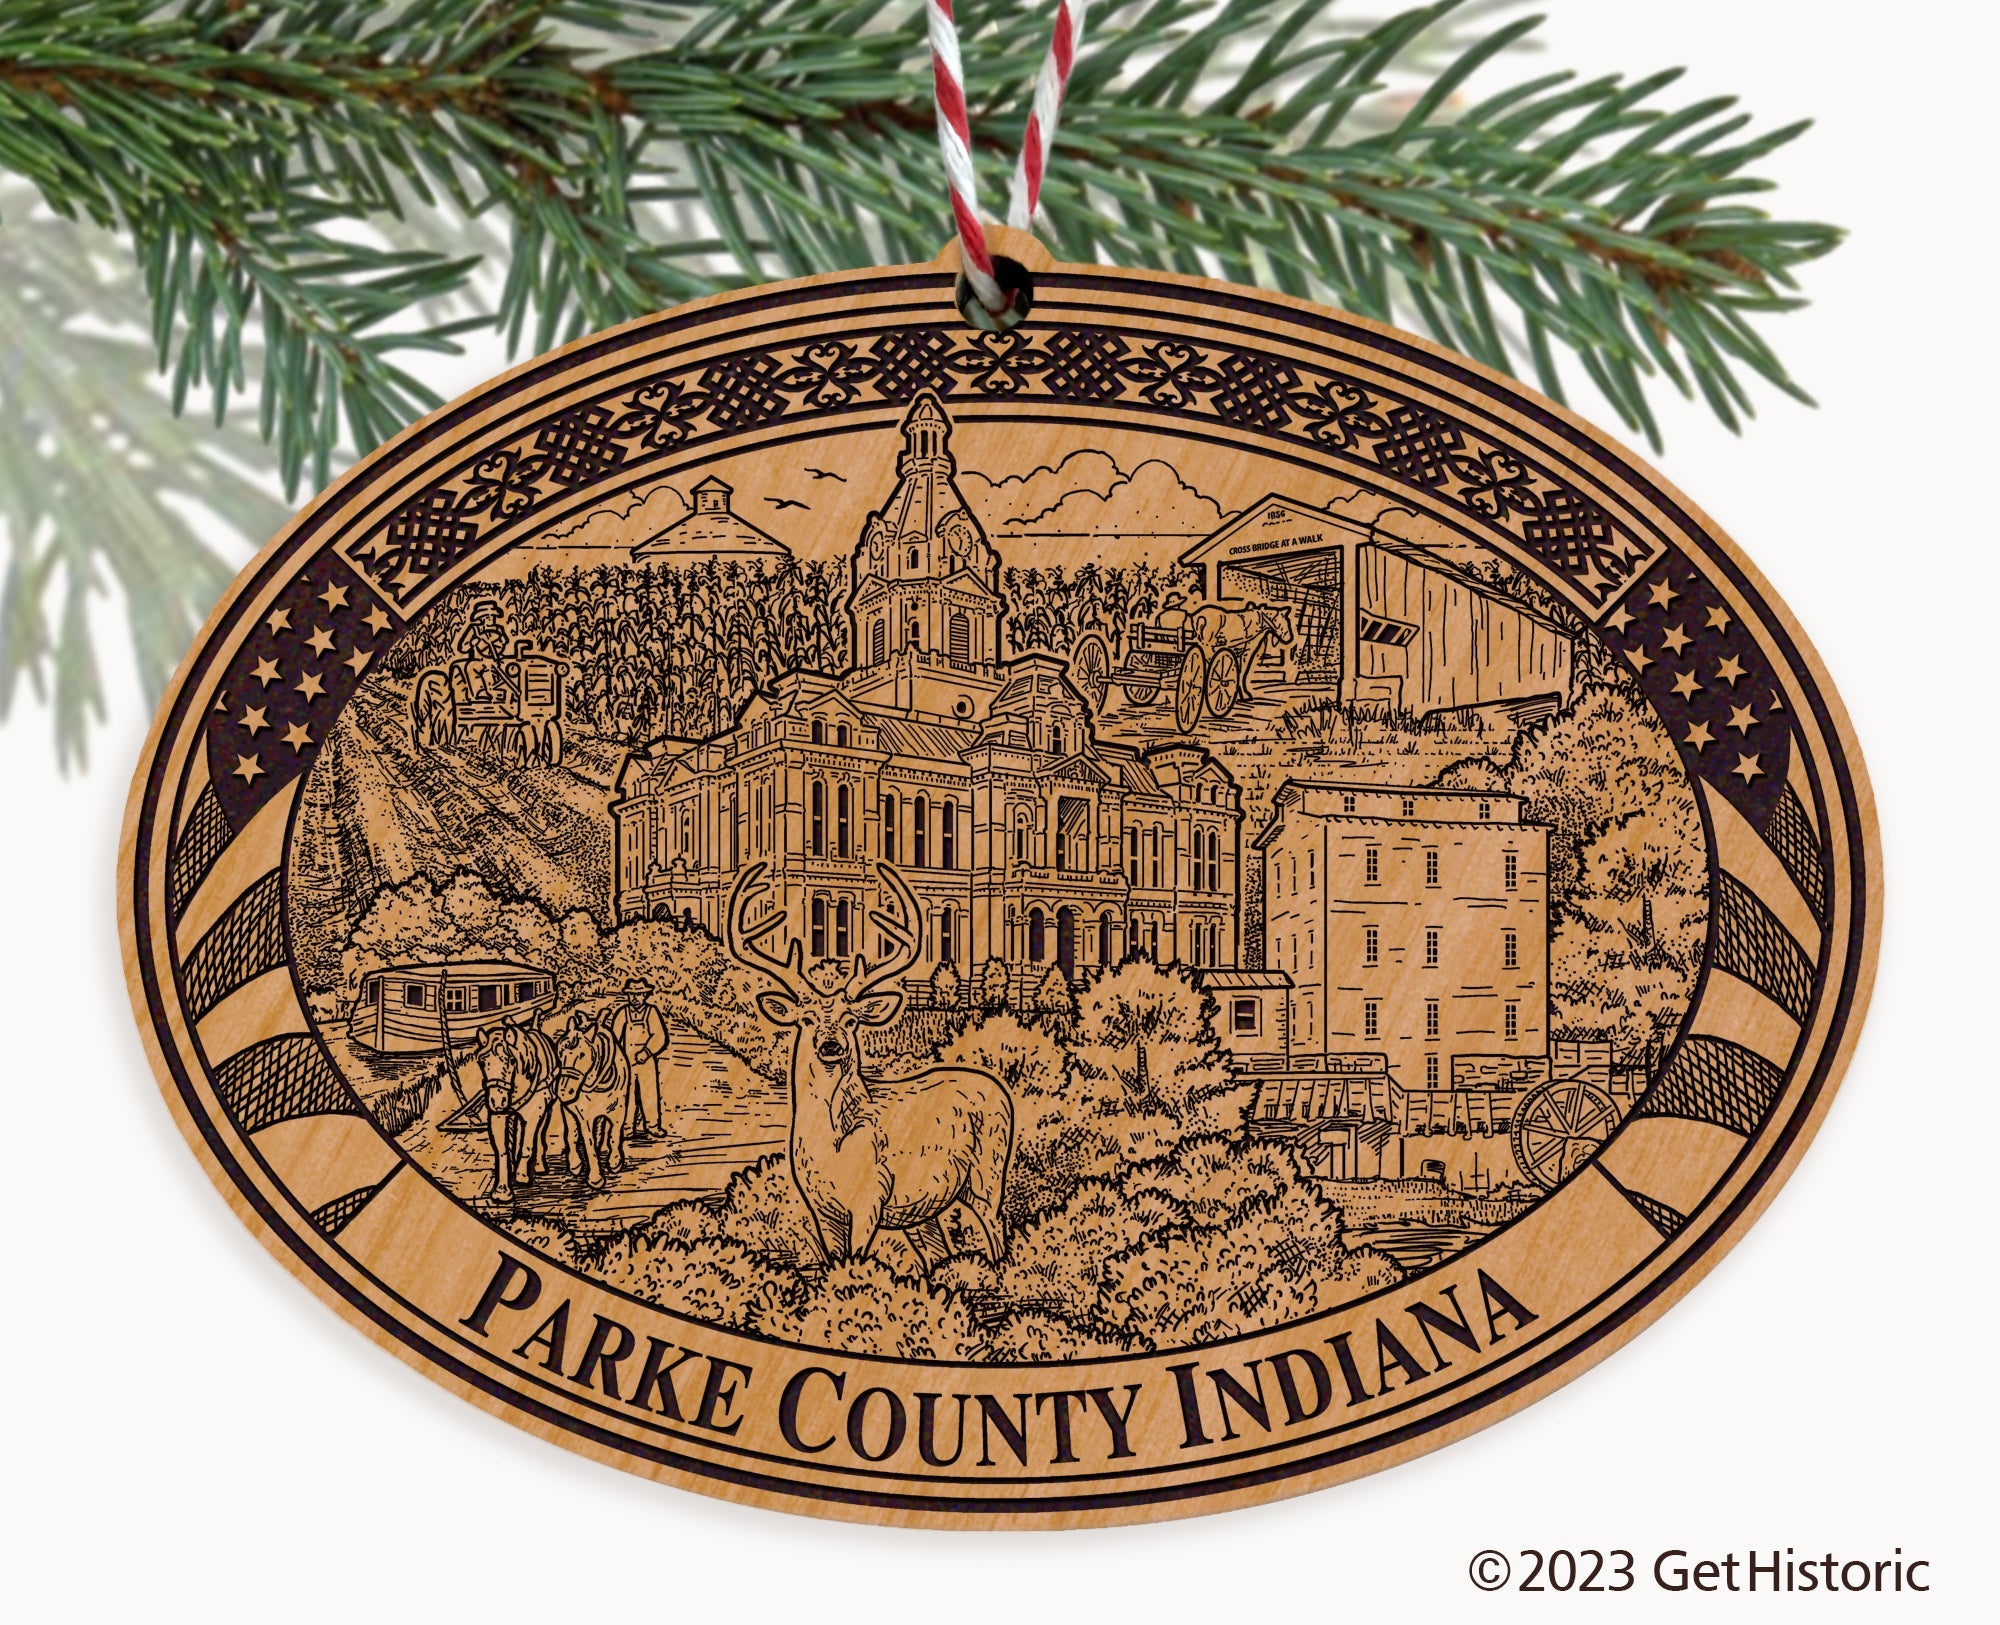 Parke County Indiana Engraved Natural Ornament